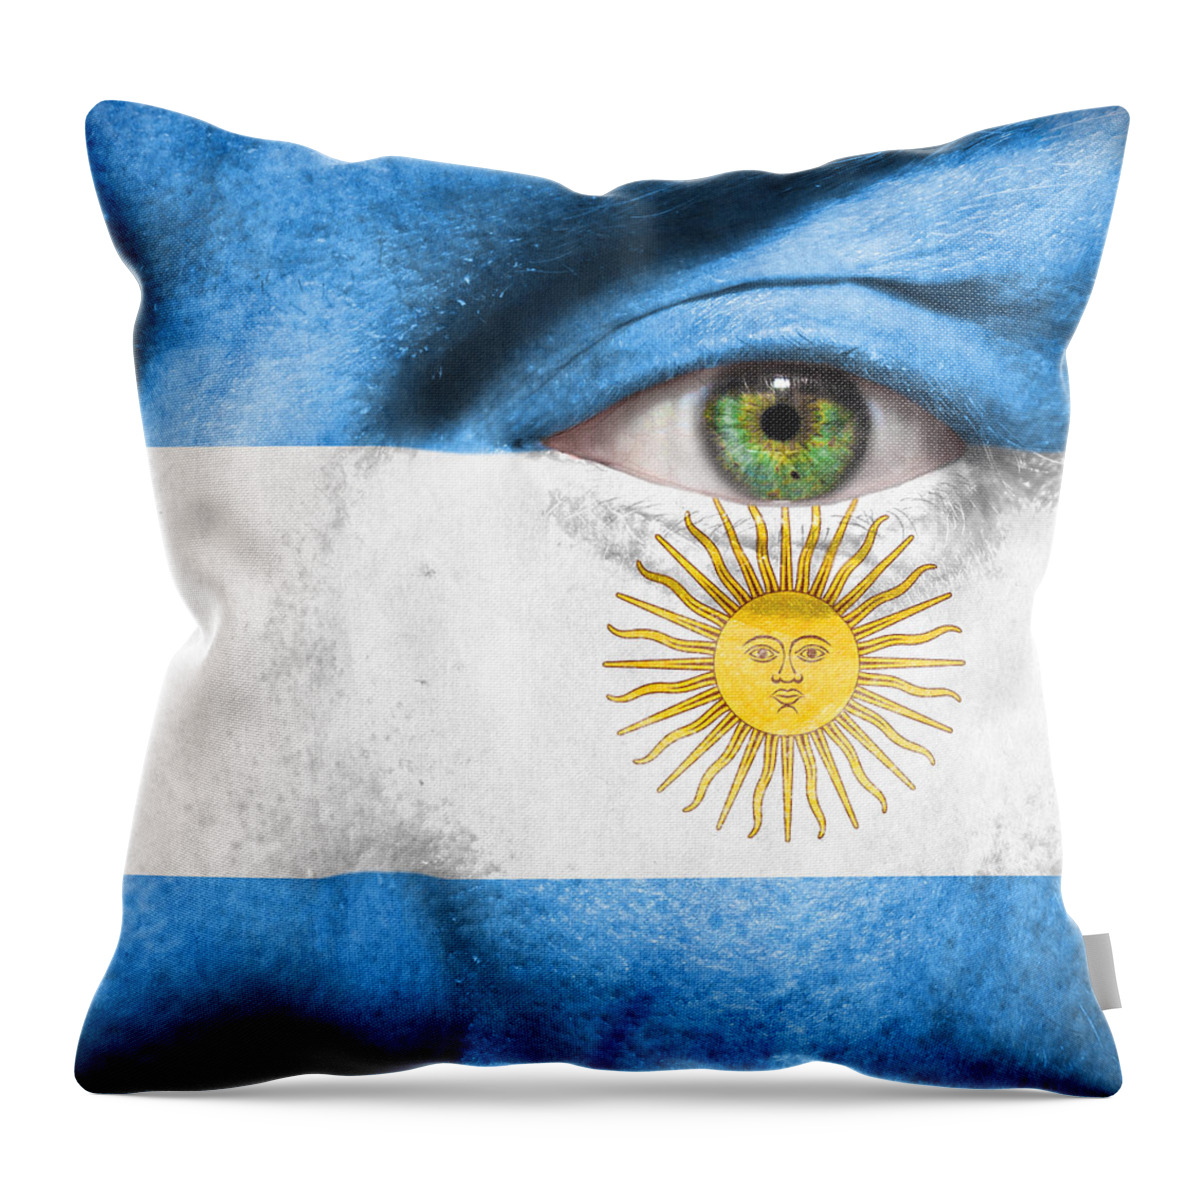 Argentina Throw Pillow featuring the photograph Go Argentina by Semmick Photo